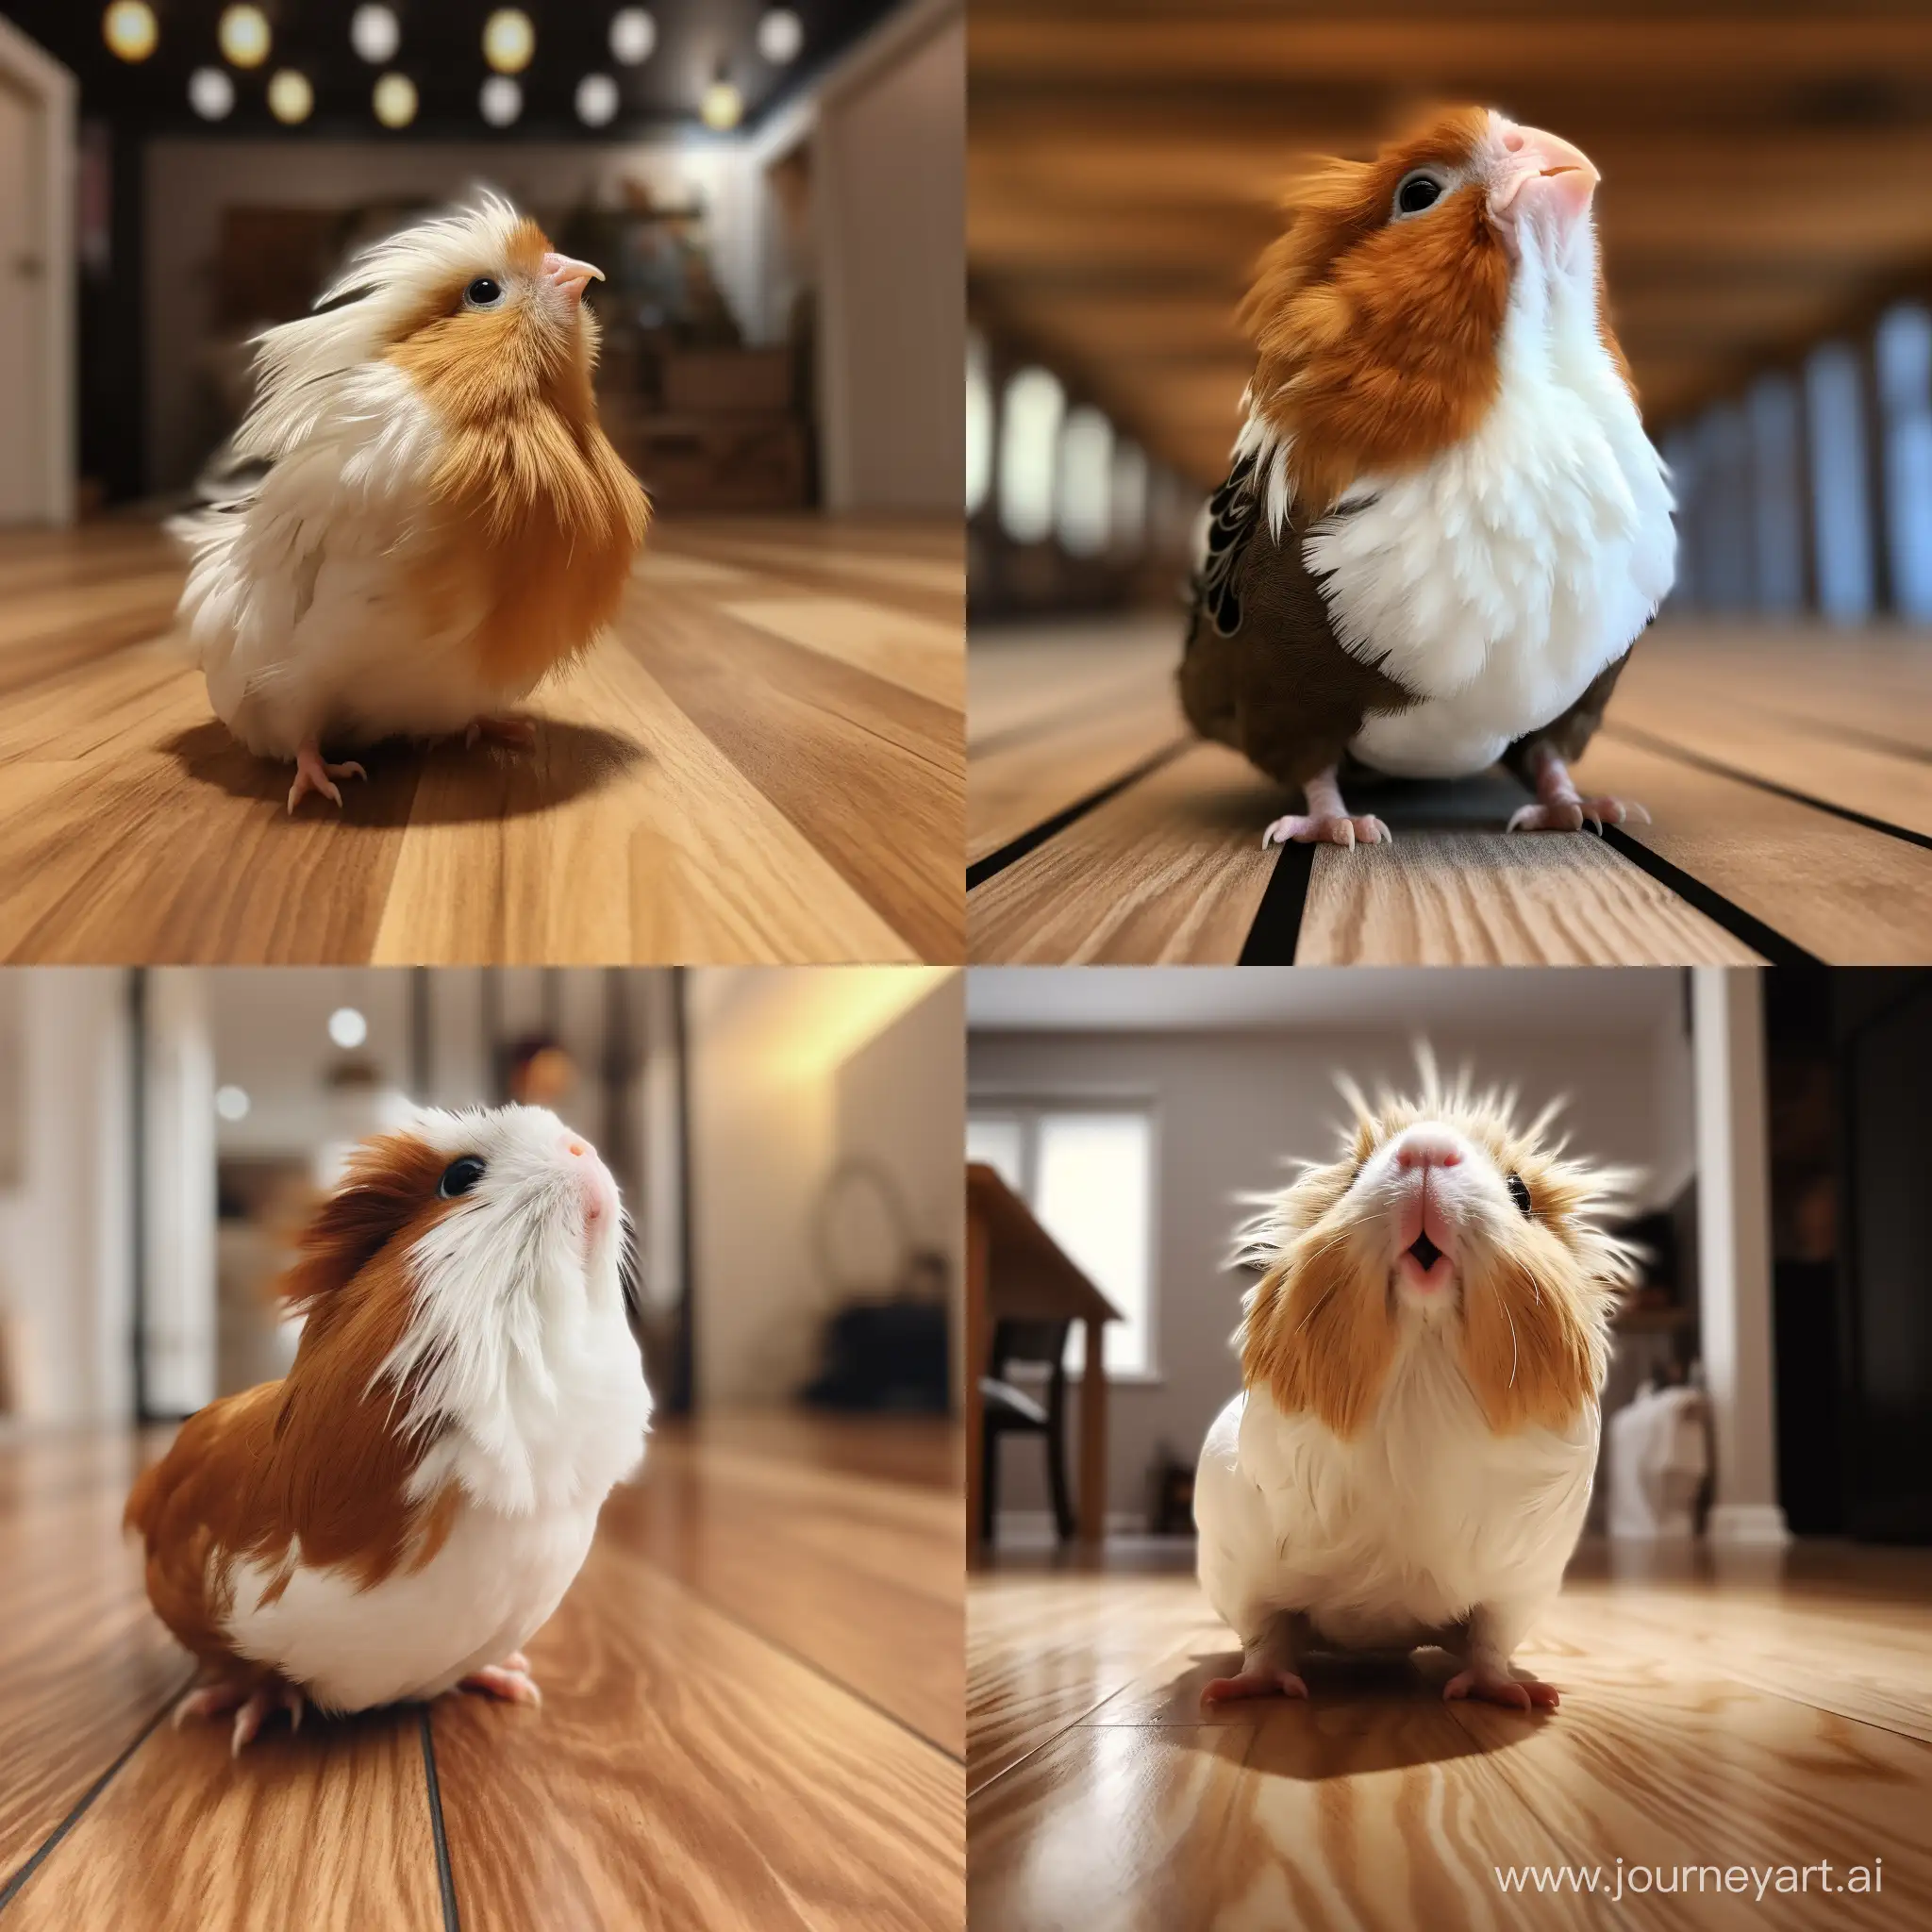 Adorable-Brown-and-White-Guinea-Pig-Poses-on-Wooden-Floor-4K-High-Res-Picture